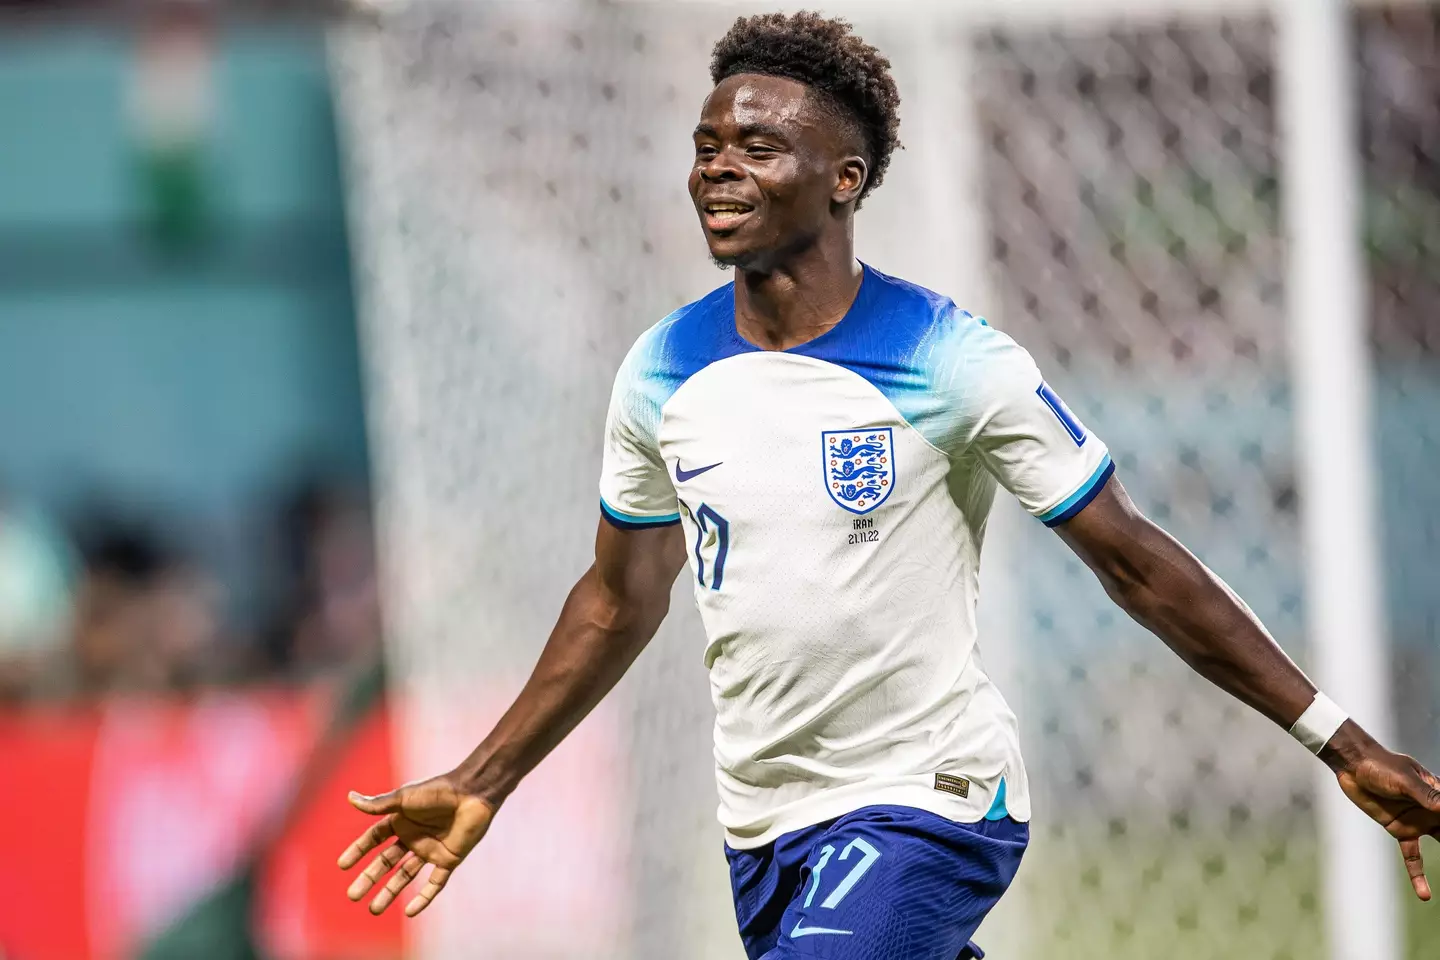 Arsenal star Bukayo Saka has impressed for England at the World Cup in Qatar.